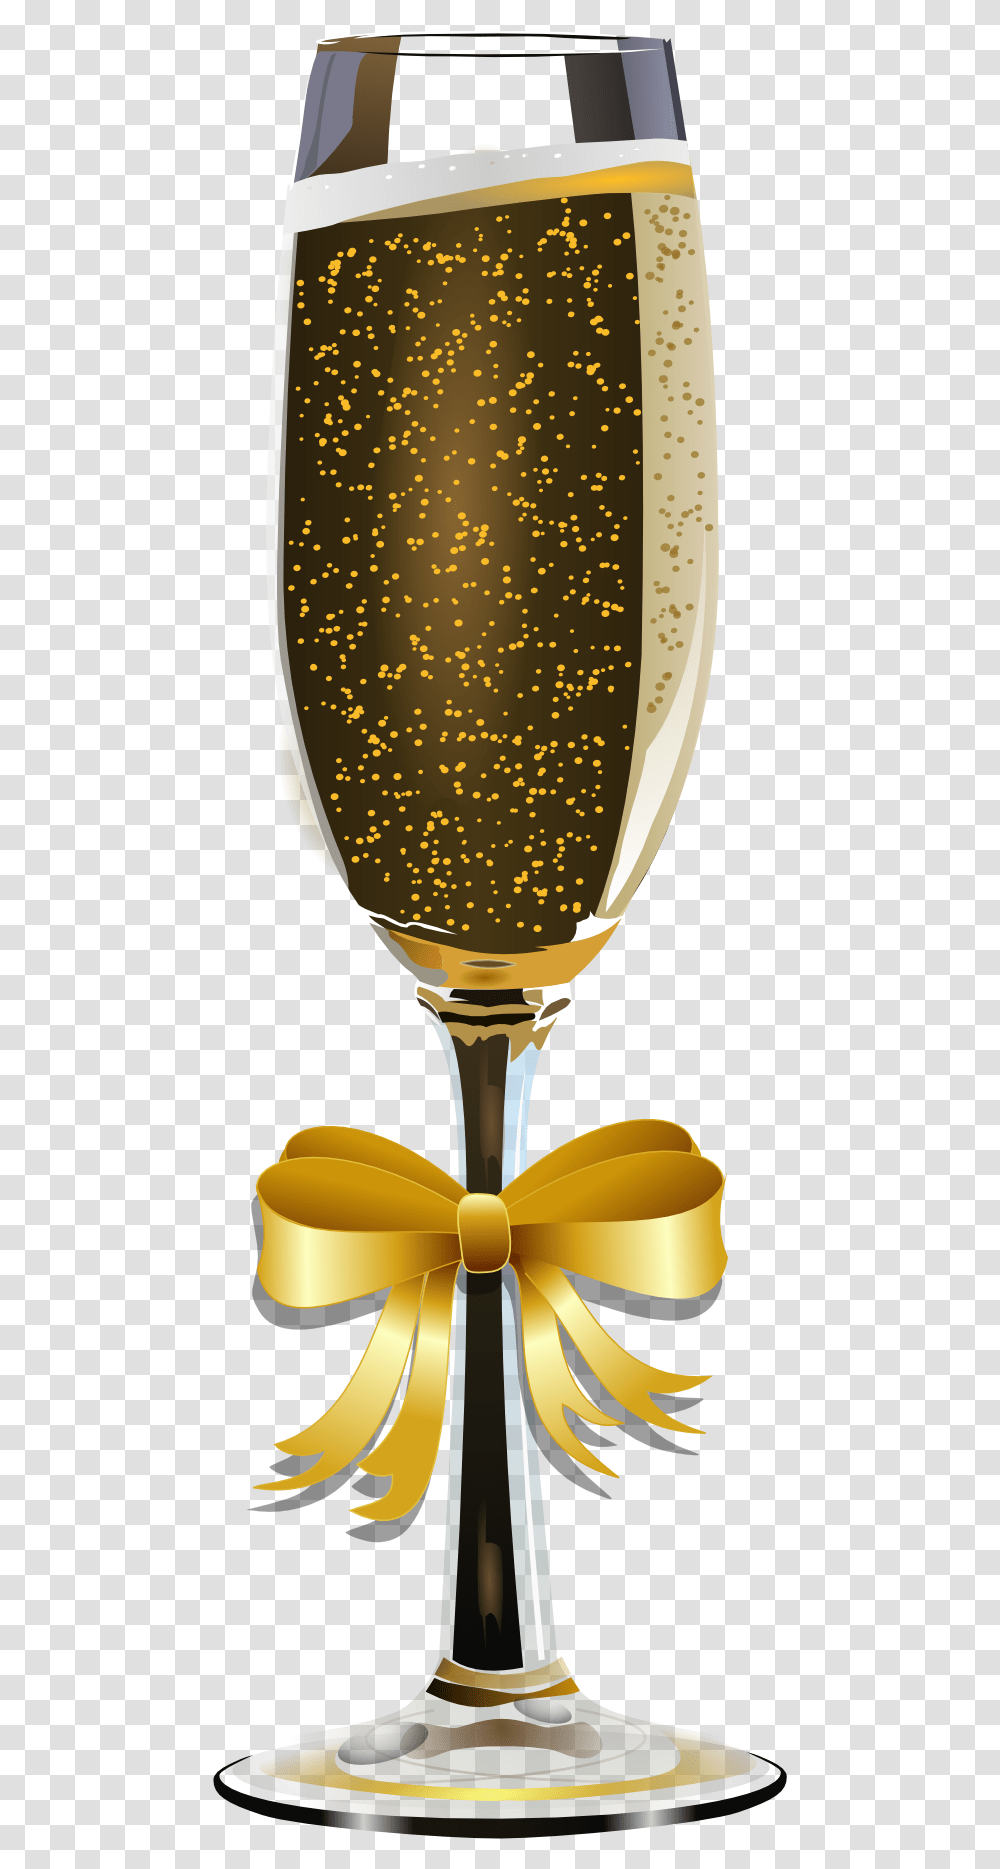 Champagne Glass Remix 2 Clip Arts Clip Art Gold Wine Glass, Beer Glass, Alcohol, Beverage, Drink Transparent Png